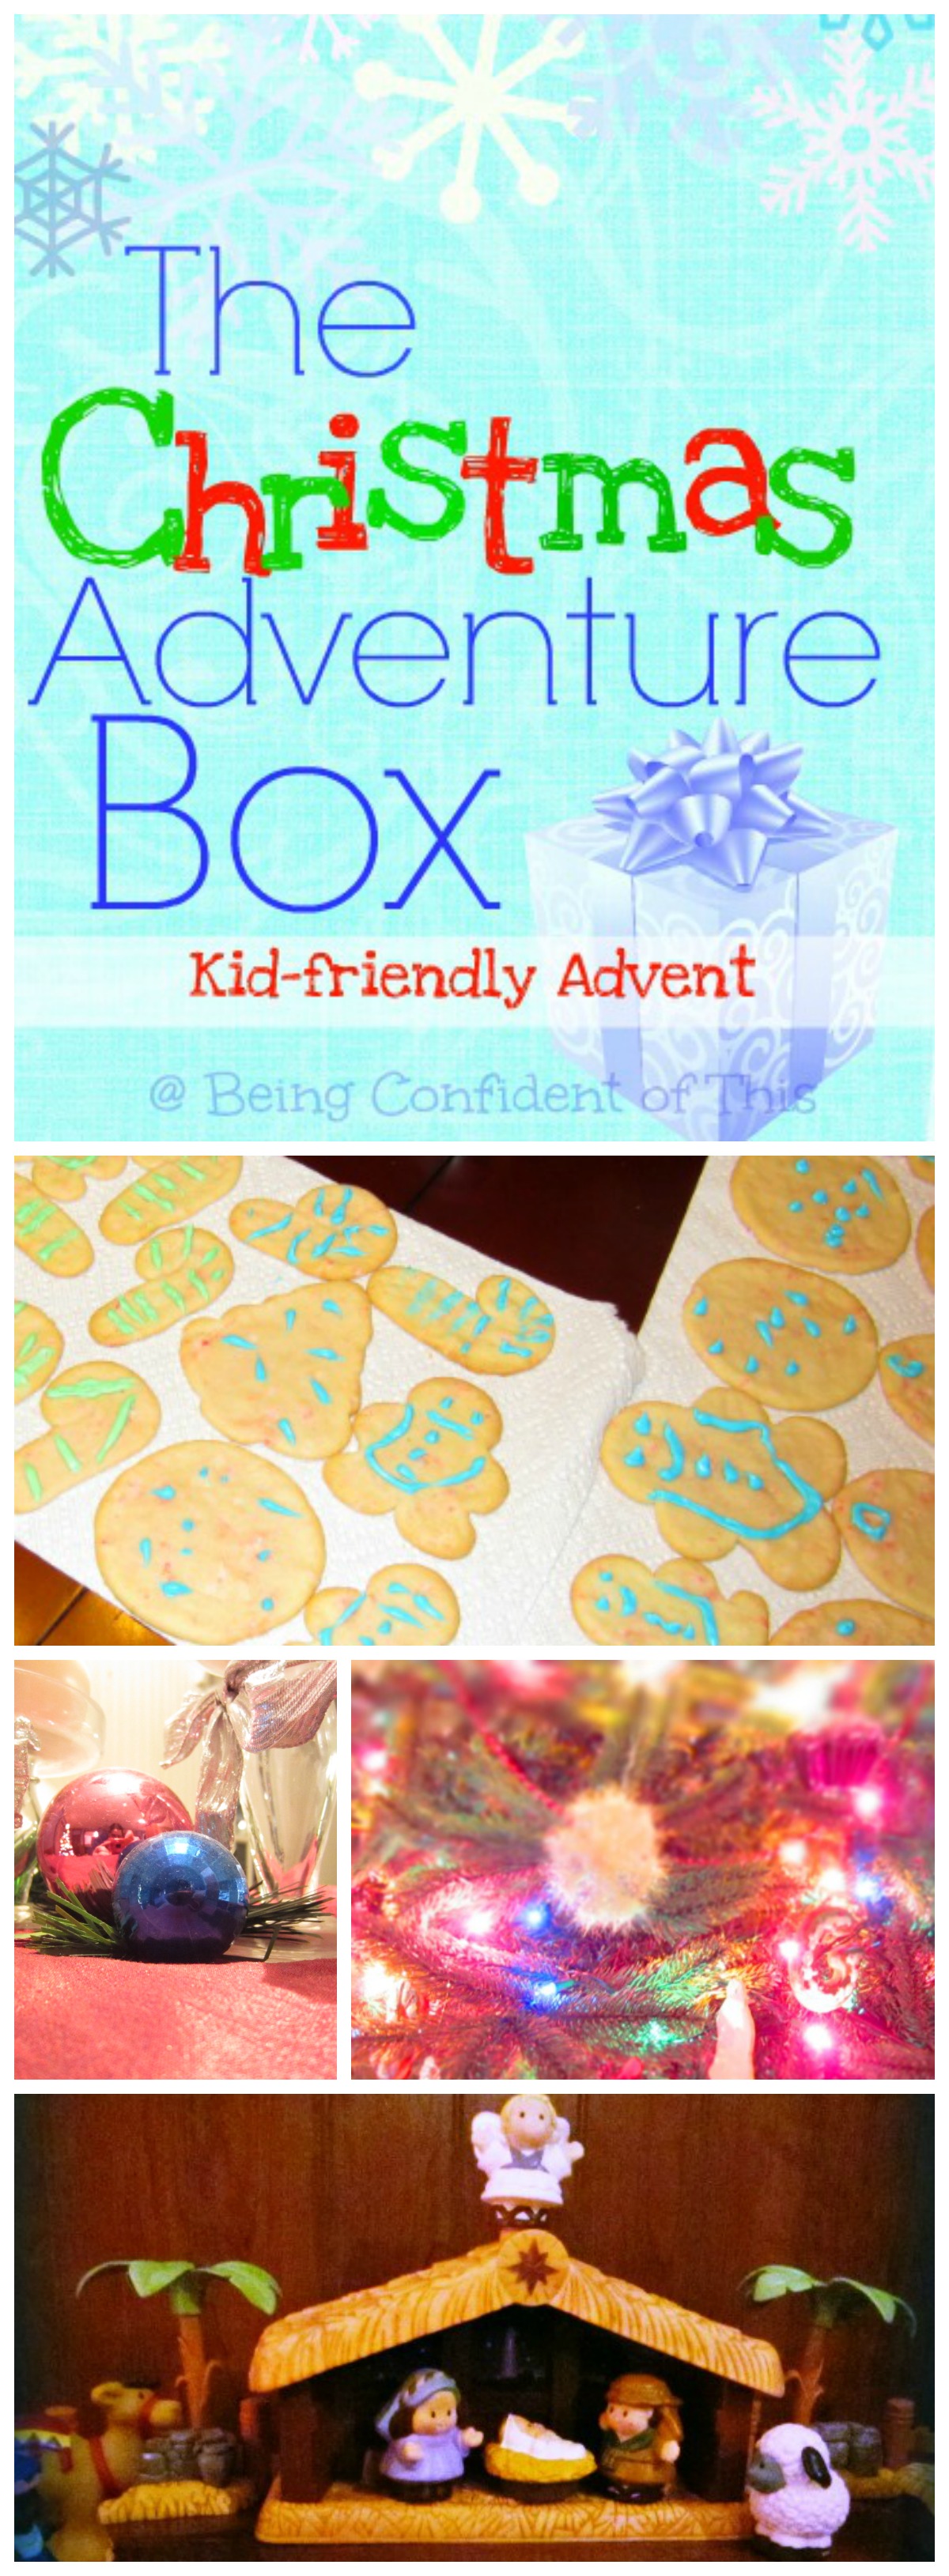 The Christmas Adventure Box is a fun, frugal, and kid-friendly activity for advent that will teach your children the true reason for celebrating the Christmas season!  Learn the spiritual significance behind some of our favorite Christmas traditions, such as Christmas trees, lights, stockings, and even candy canes!